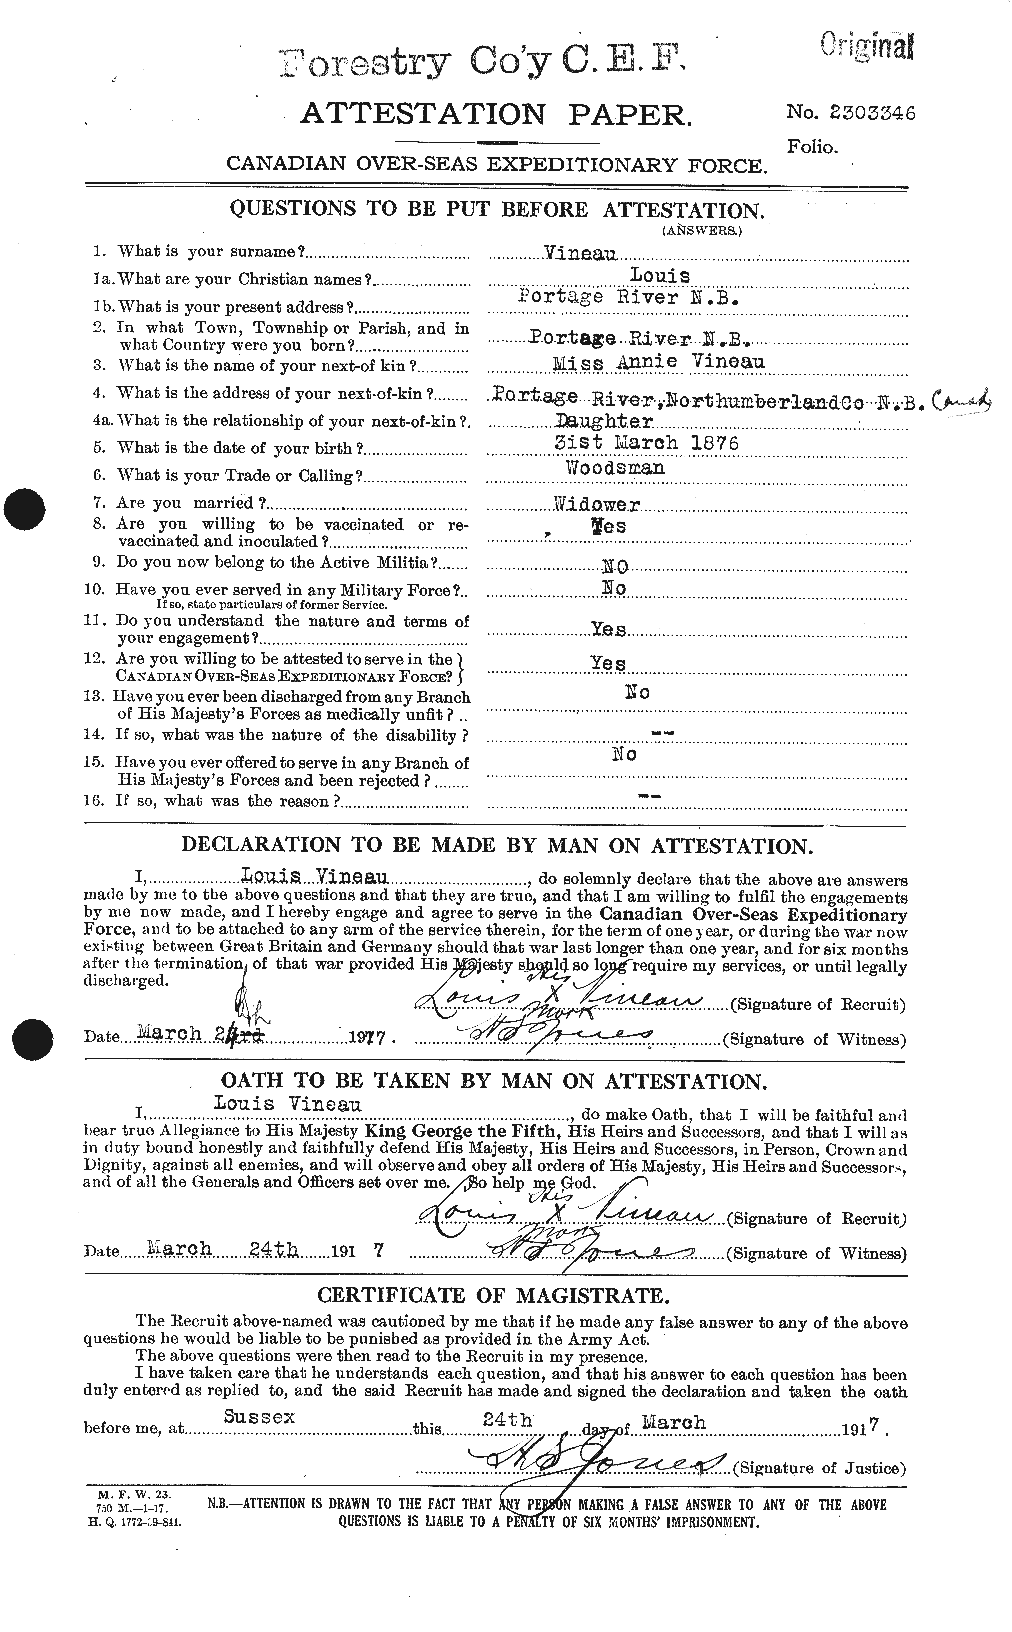 Personnel Records of the First World War - CEF 656586a